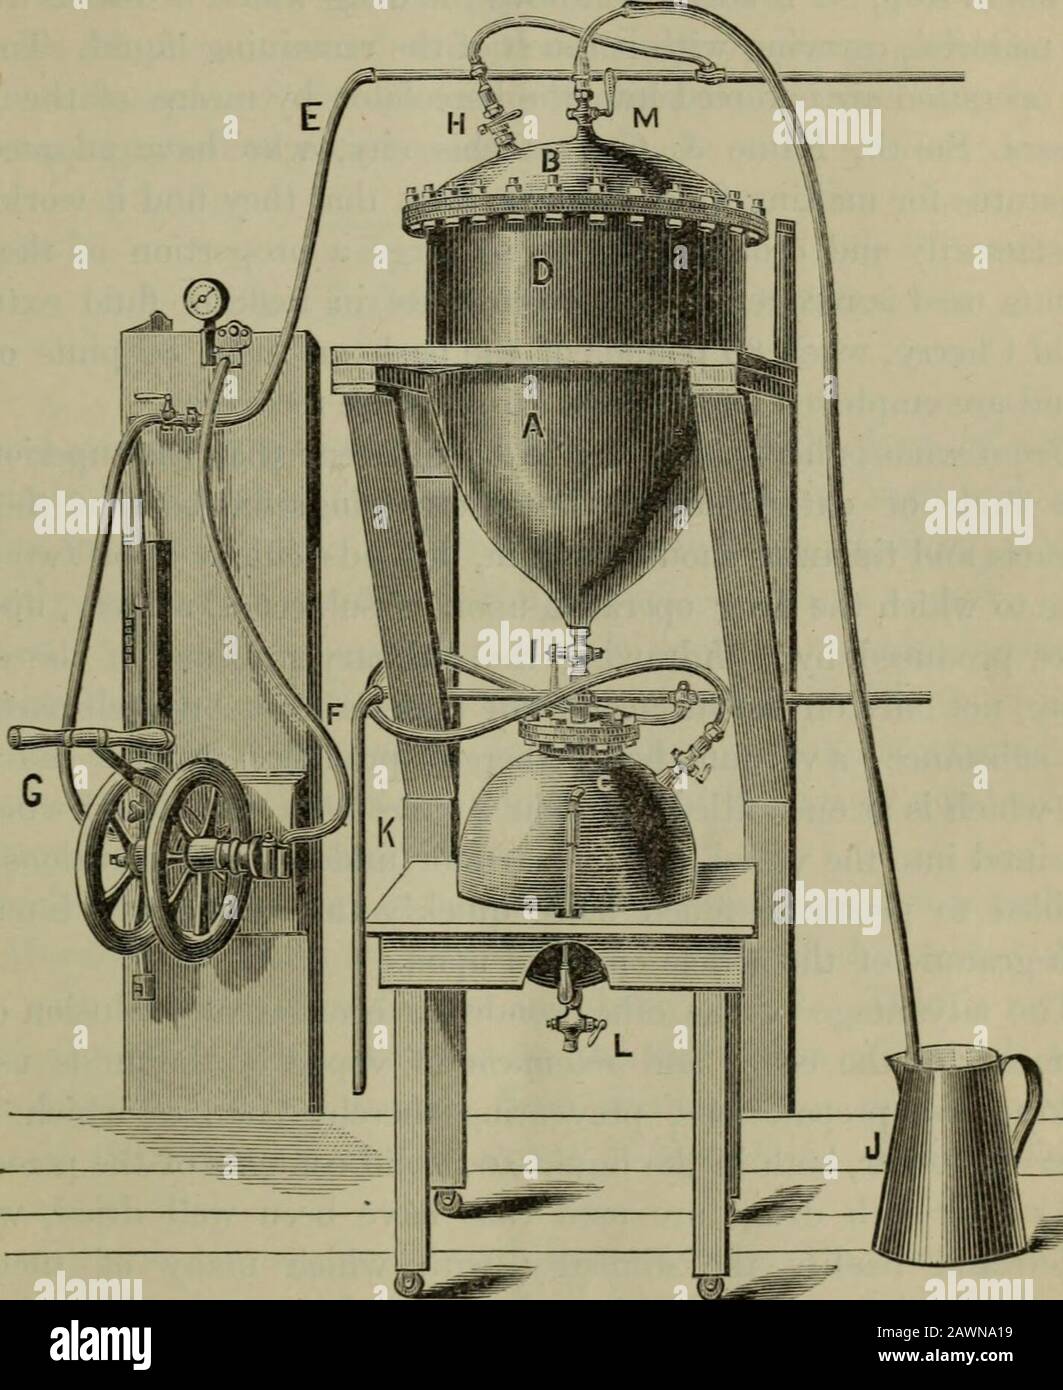 American journal of pharmacy . t that a description of the percolator and oftJie manner in which it is used might be as acceptable to others as it wasto me. By referring to the annexed cut the use of each part will&lt;jasily be understood. The shai)e of the percolator differs somewhatfrom the usual form, being to some extent egg-shaj^ed, and articles]:)acked in it are not so liable to become so coni])ressed as to impede])ercolation, as is sometimes the case when the ordinary form of dis-placer is used which more nearly approaches the cylindrical form. Thecover B, which is hemispherical in shap Stock Photo